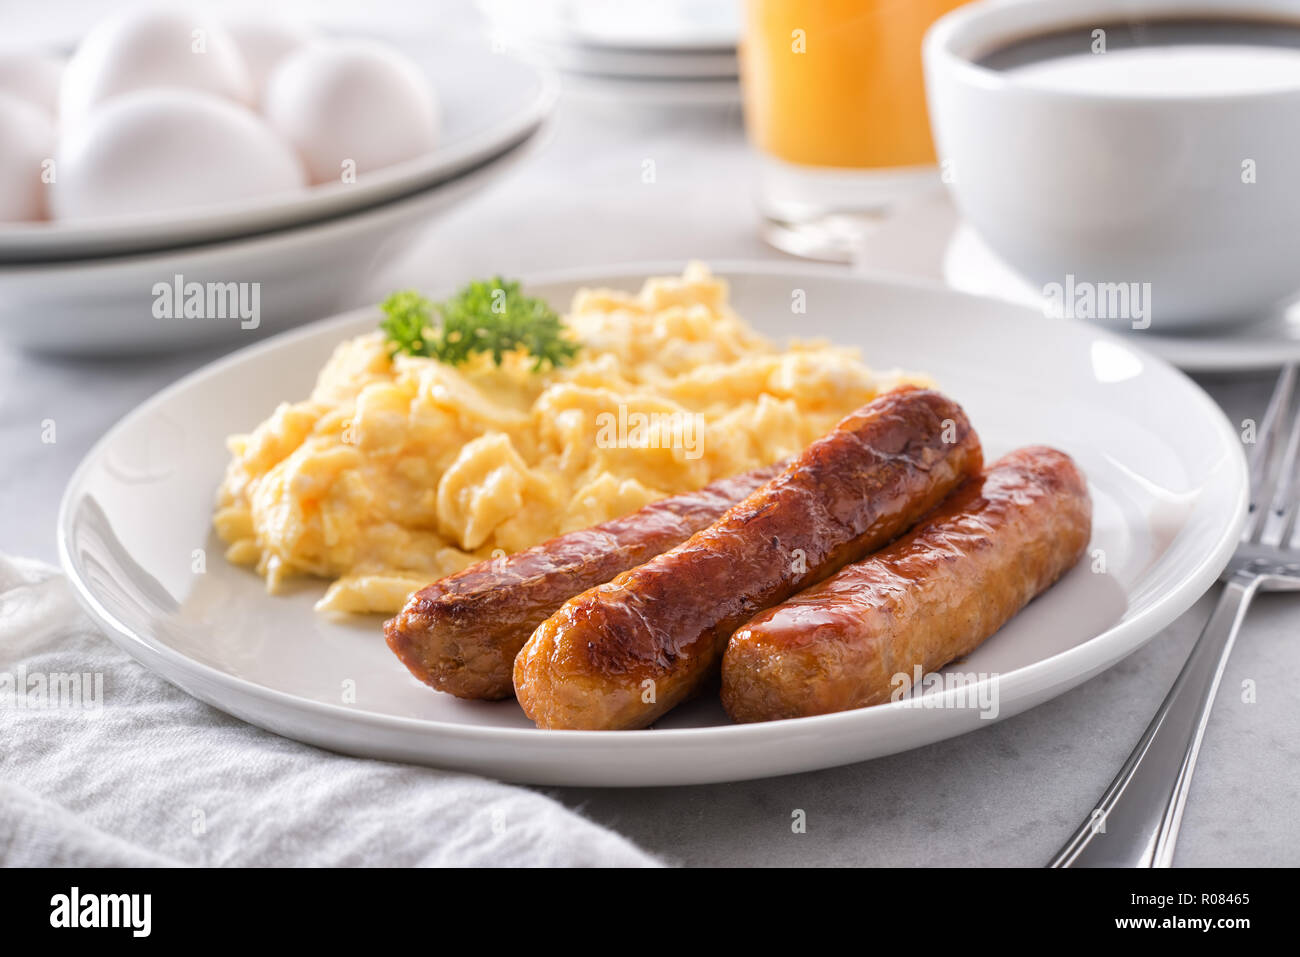 A plate of delicious scrambled eggs and breakfast sausage with coffee and orange juice. Stock Photo